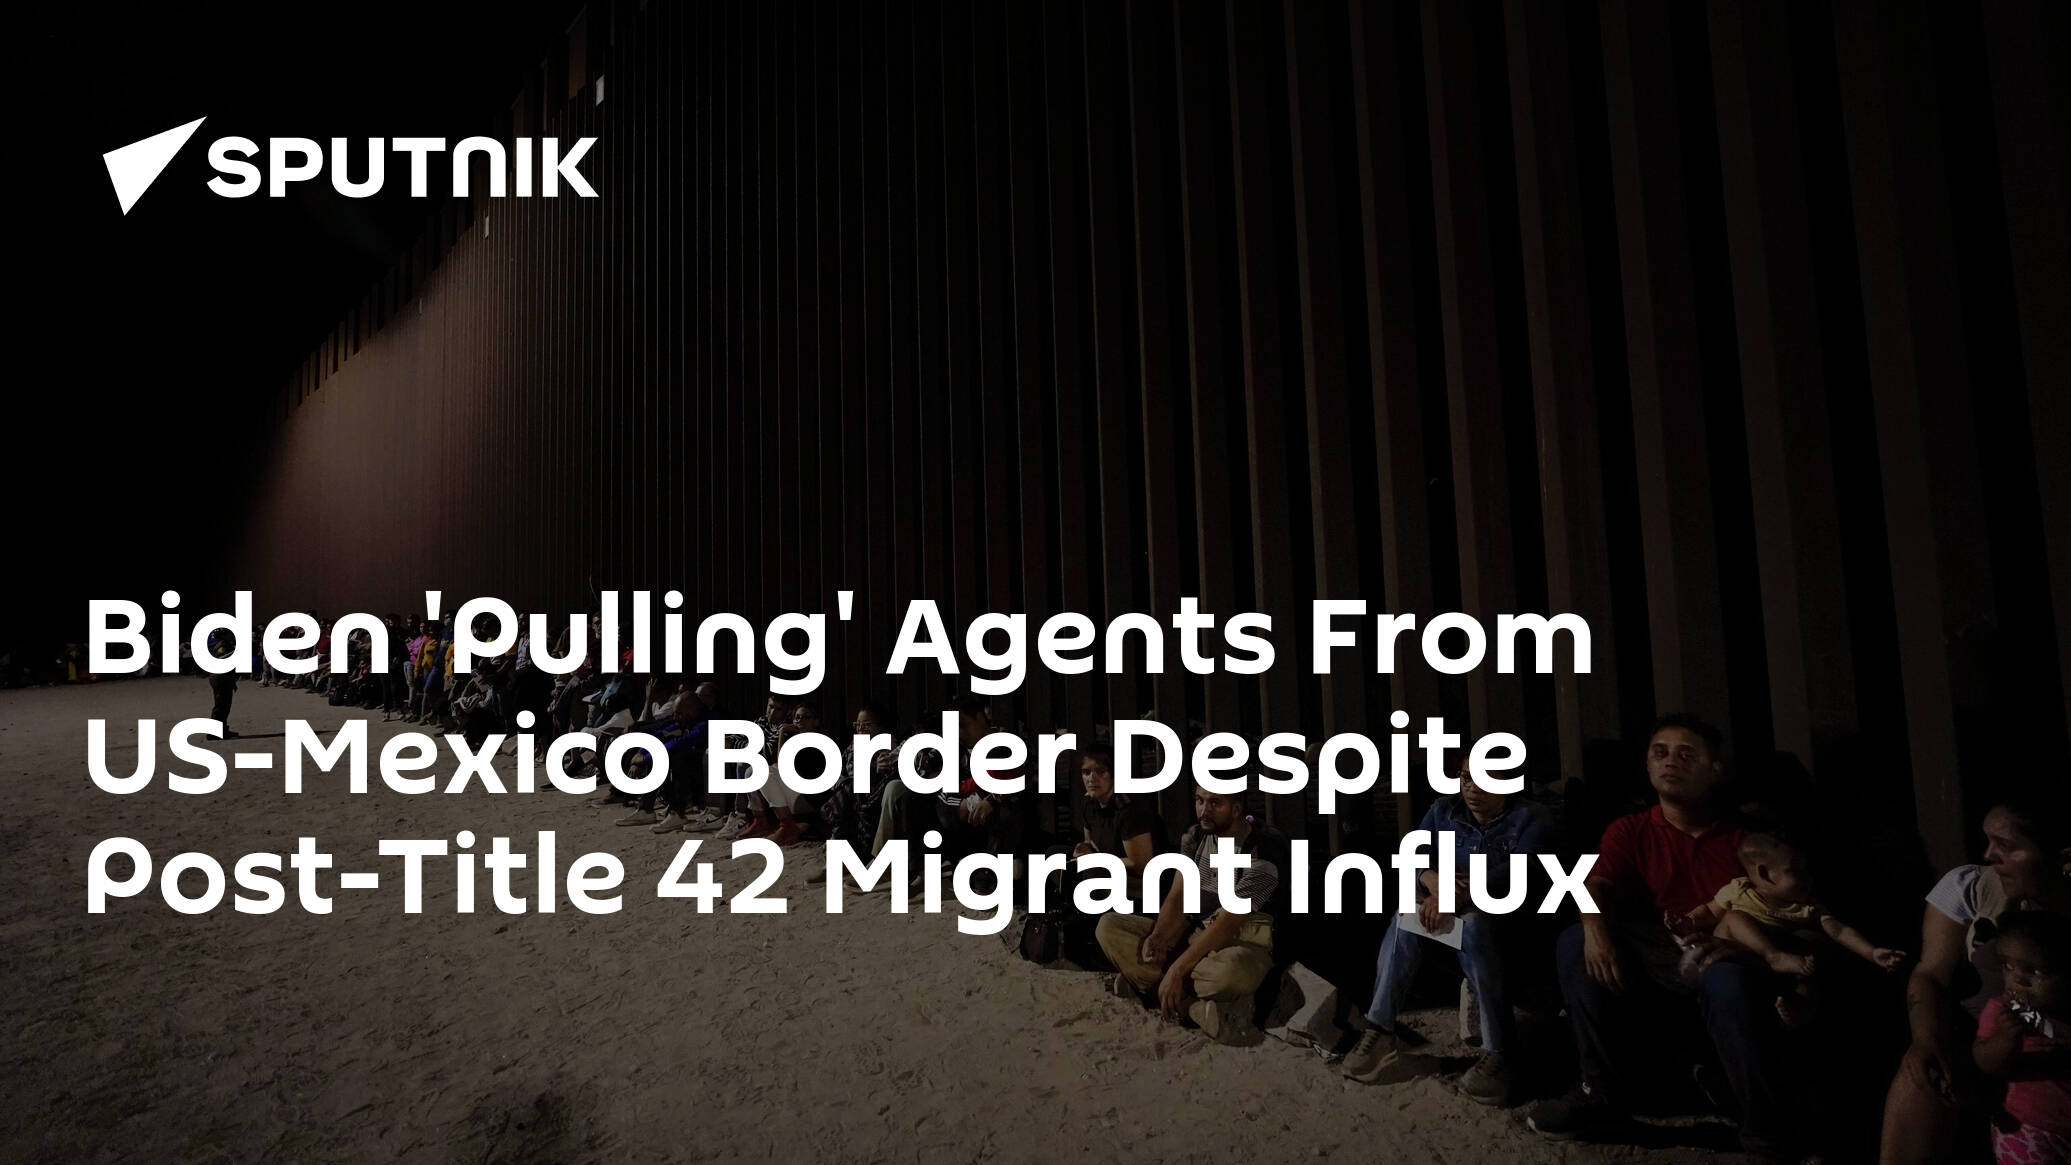 Biden 'Pulling' Agents From US-Mexico Border Despite Post-Title 42 Migrant Influx